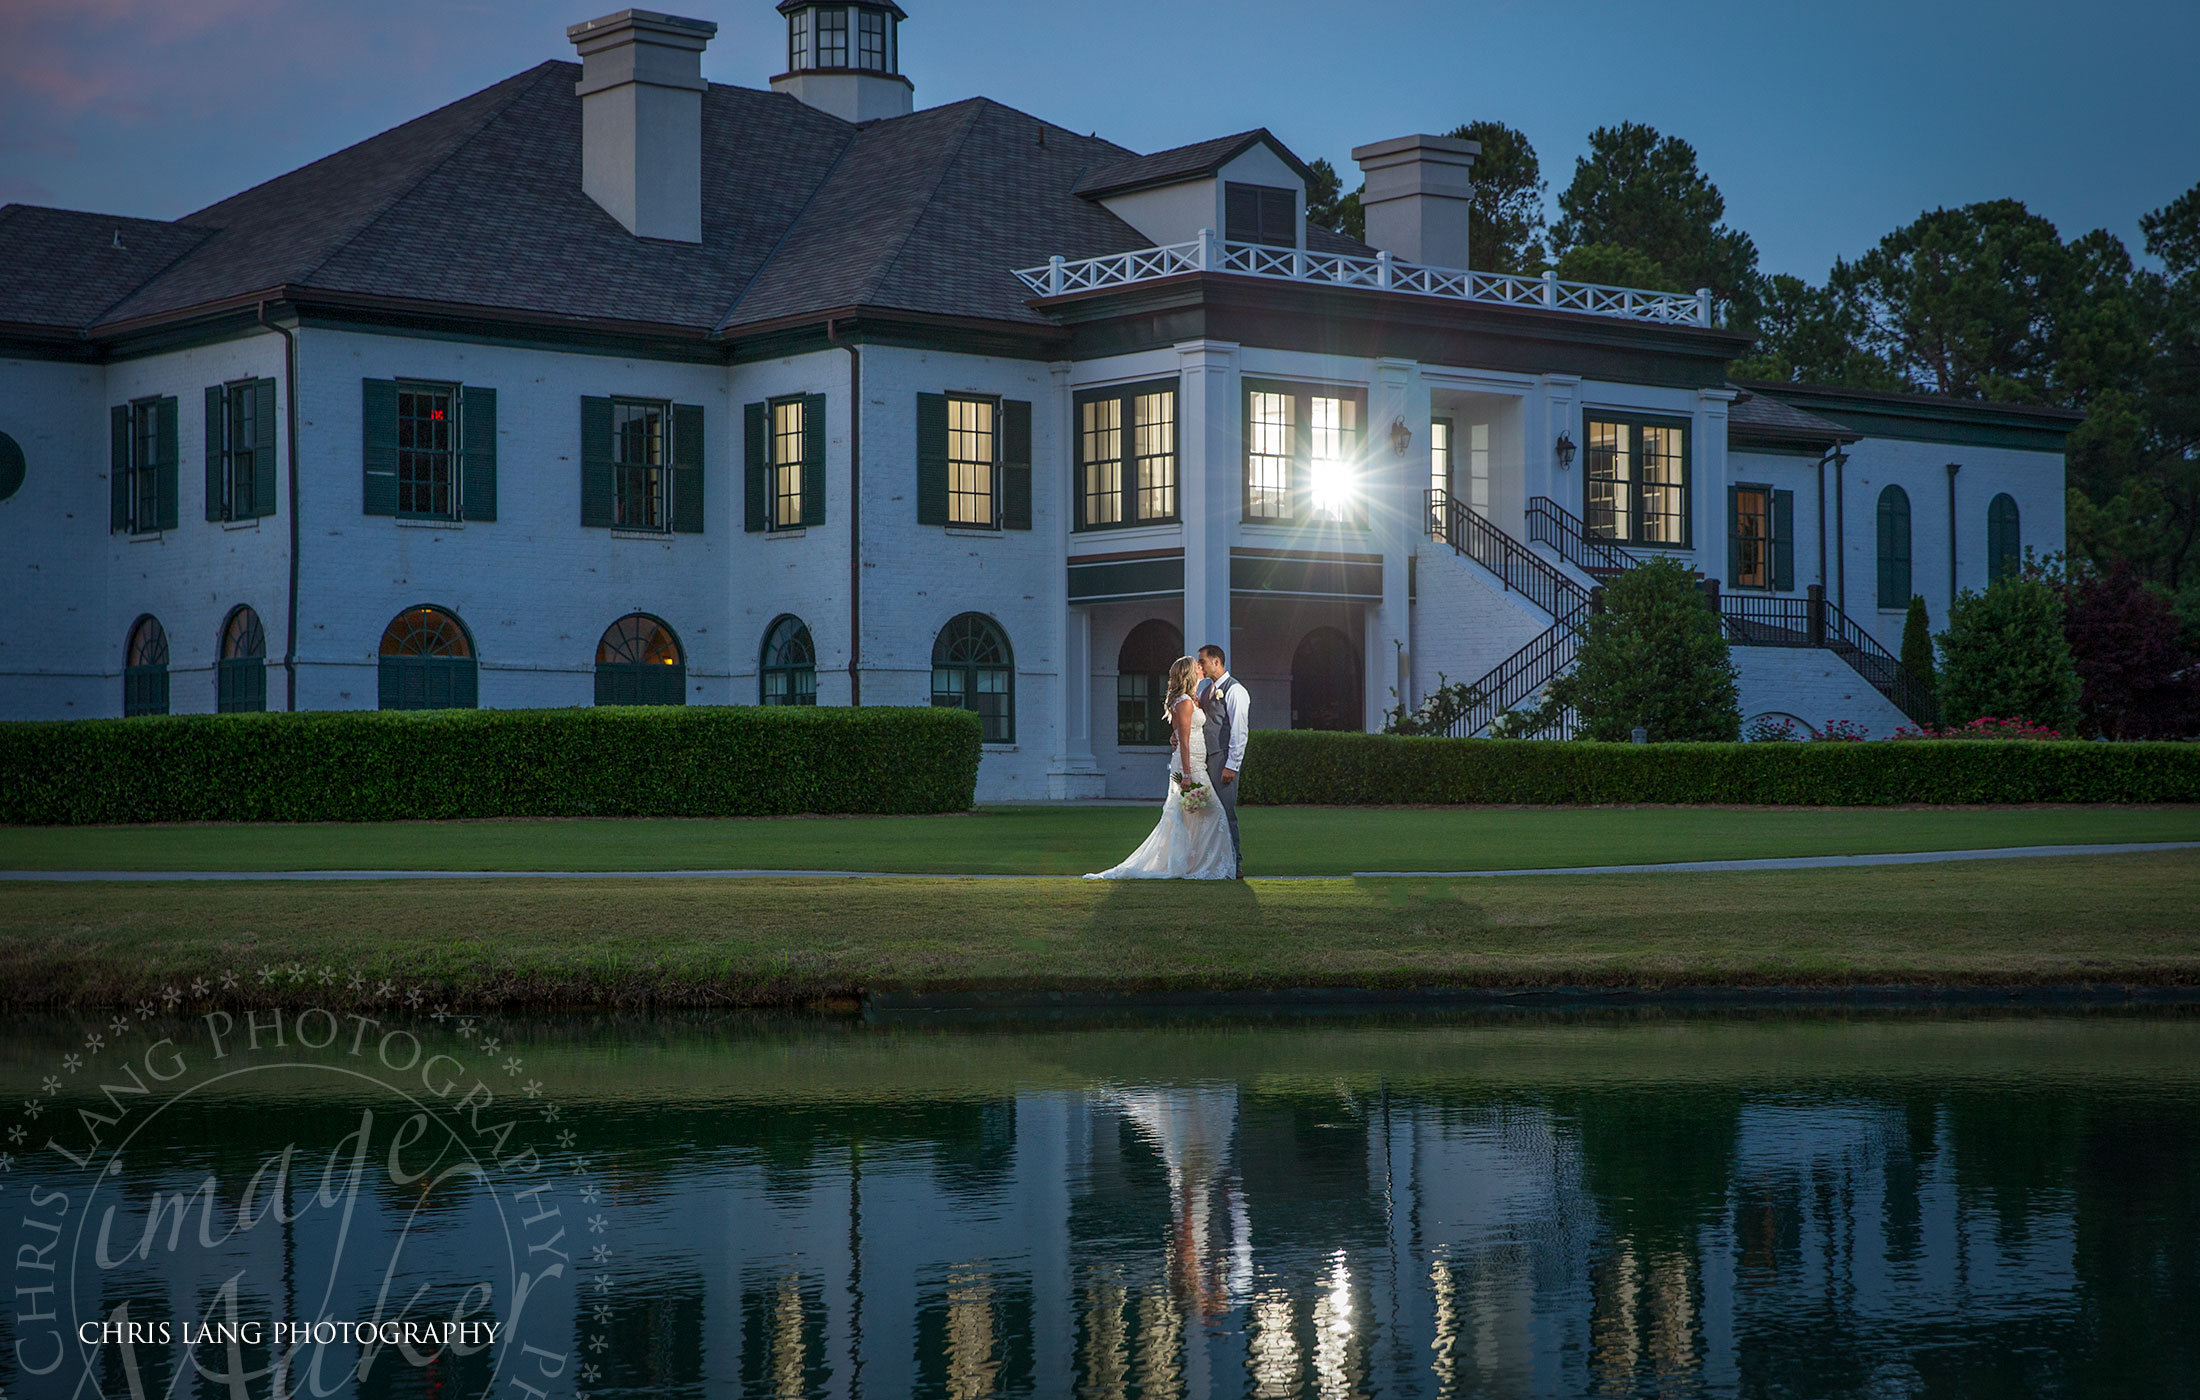 Porters Neck Country Club Weddings -Image of wedding couple in front of the Porters Neck Country Club overlloking the lake on the golf course.